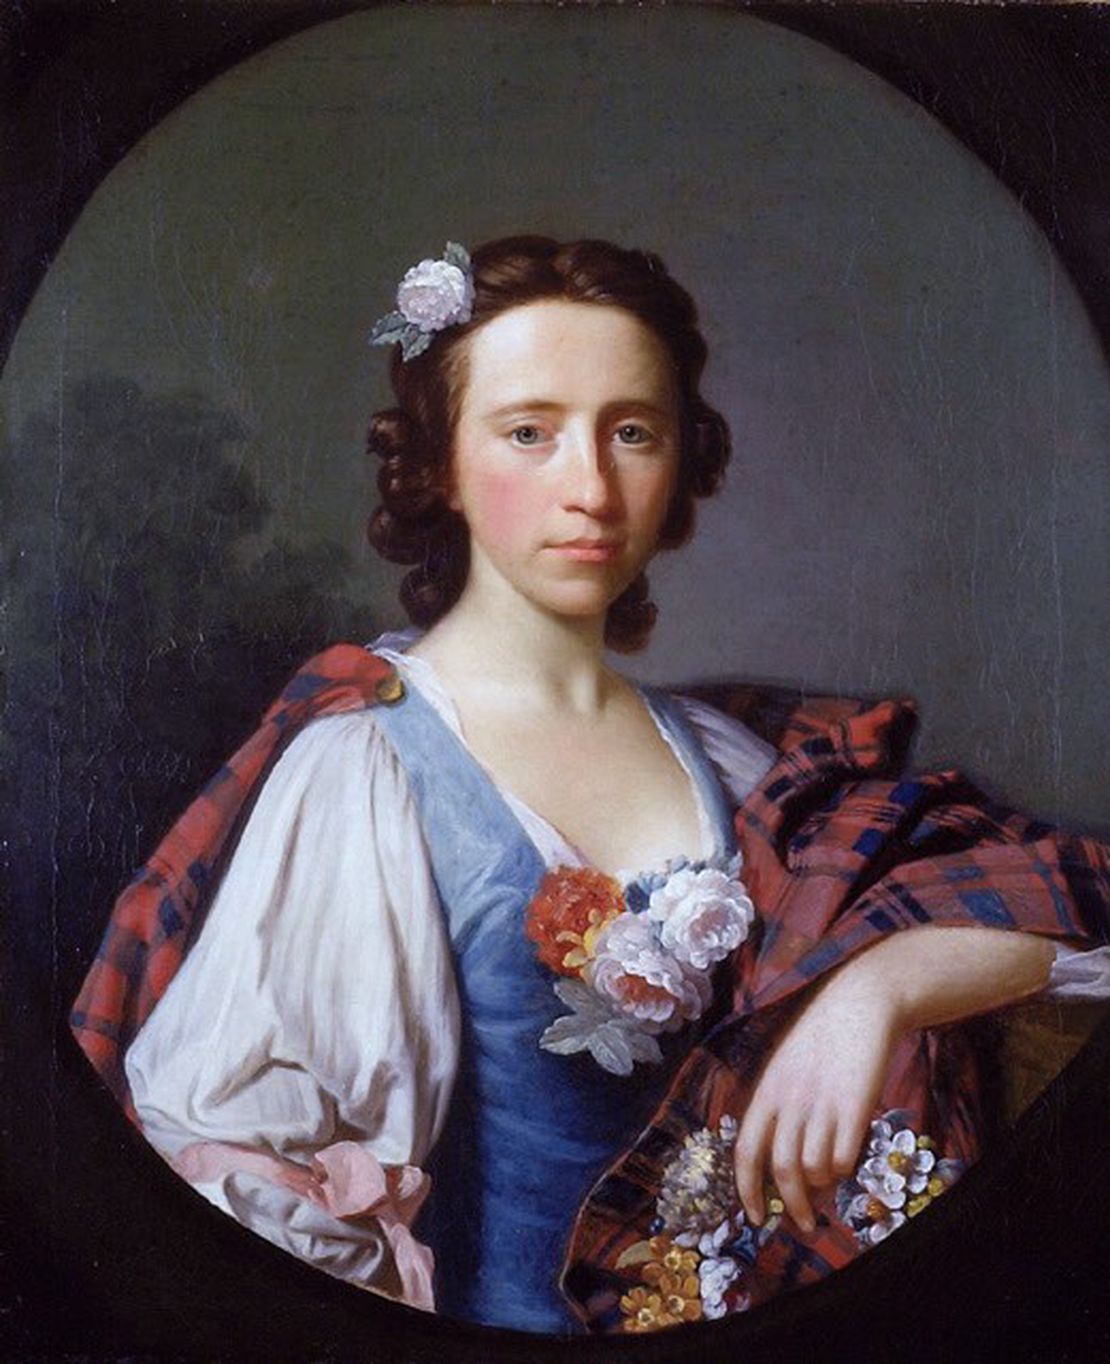 Flora MacDonald, who helped to save Prince Charles Edward Stewart, died